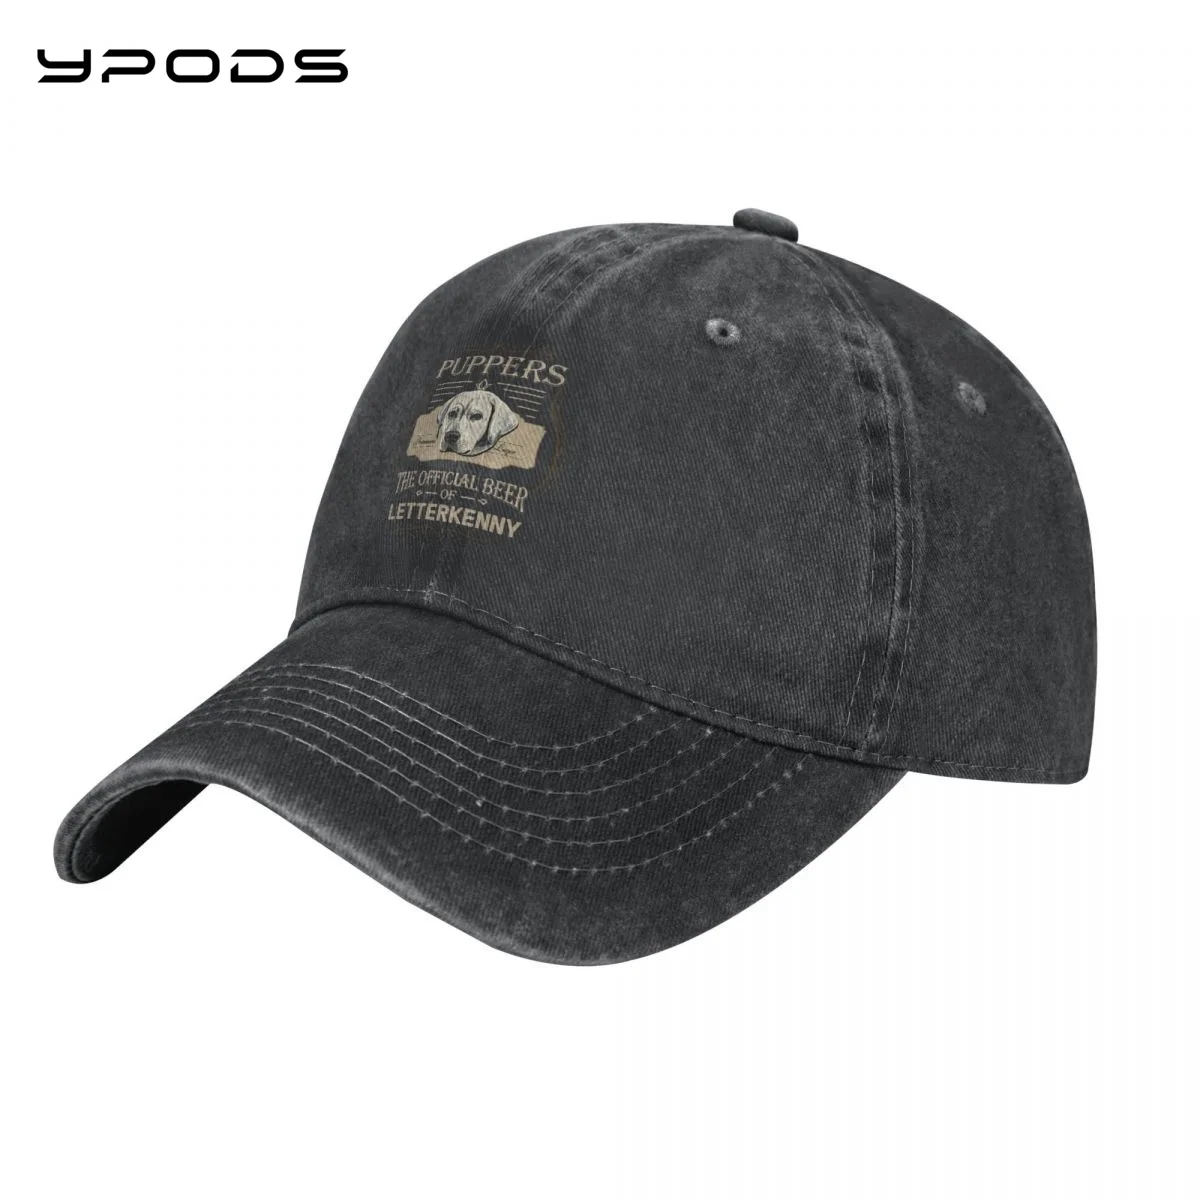 

Puppers Premium Larger The Offical Beer Of Letterkenny Vintage Baseball Cap Washable Cotton Adjustable Cap Hats For Men